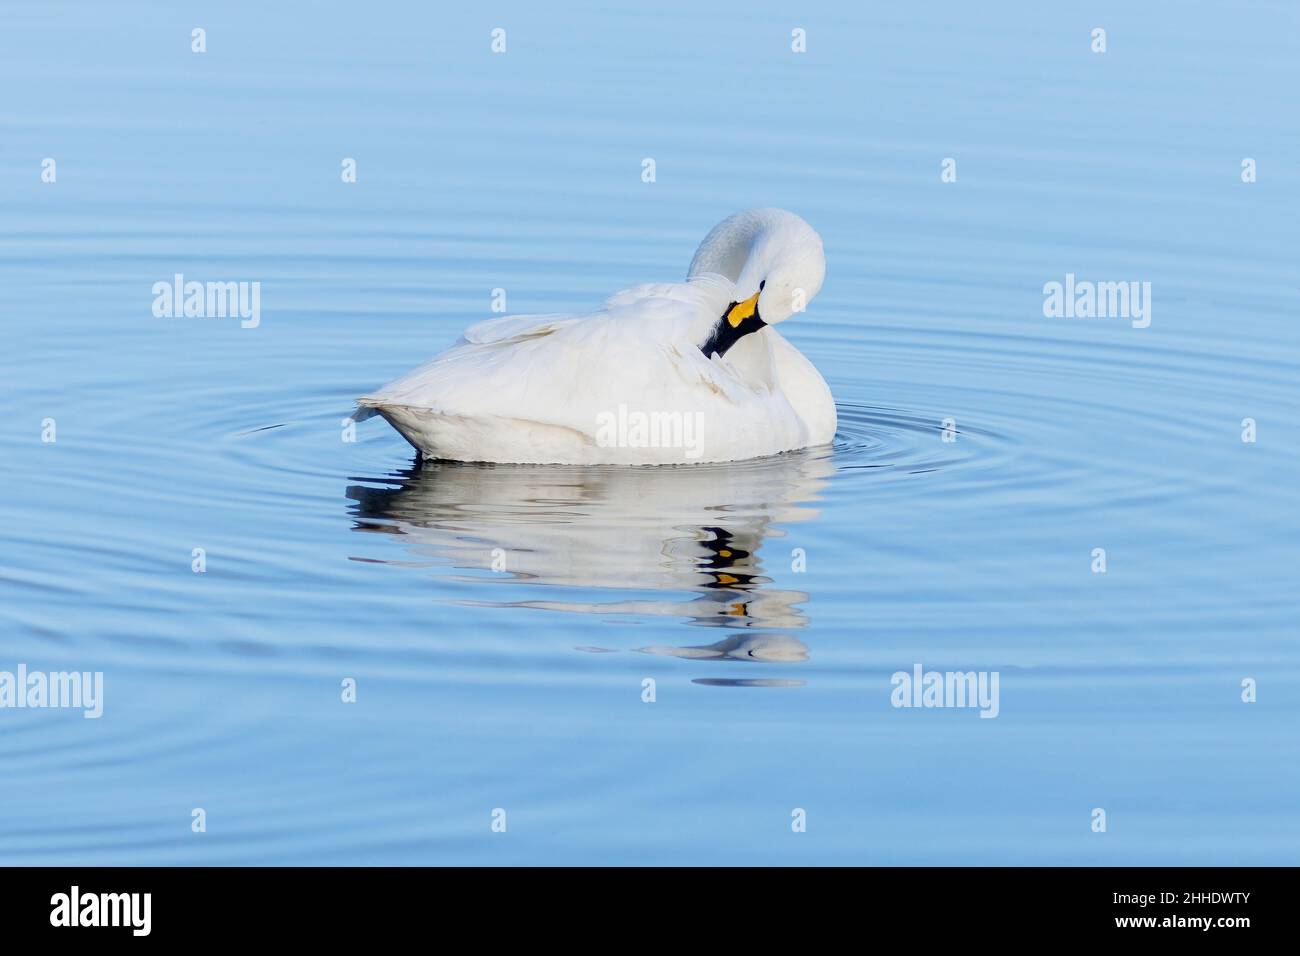 A single Bewick Swan on a lake, reflected in the water Stock Photo